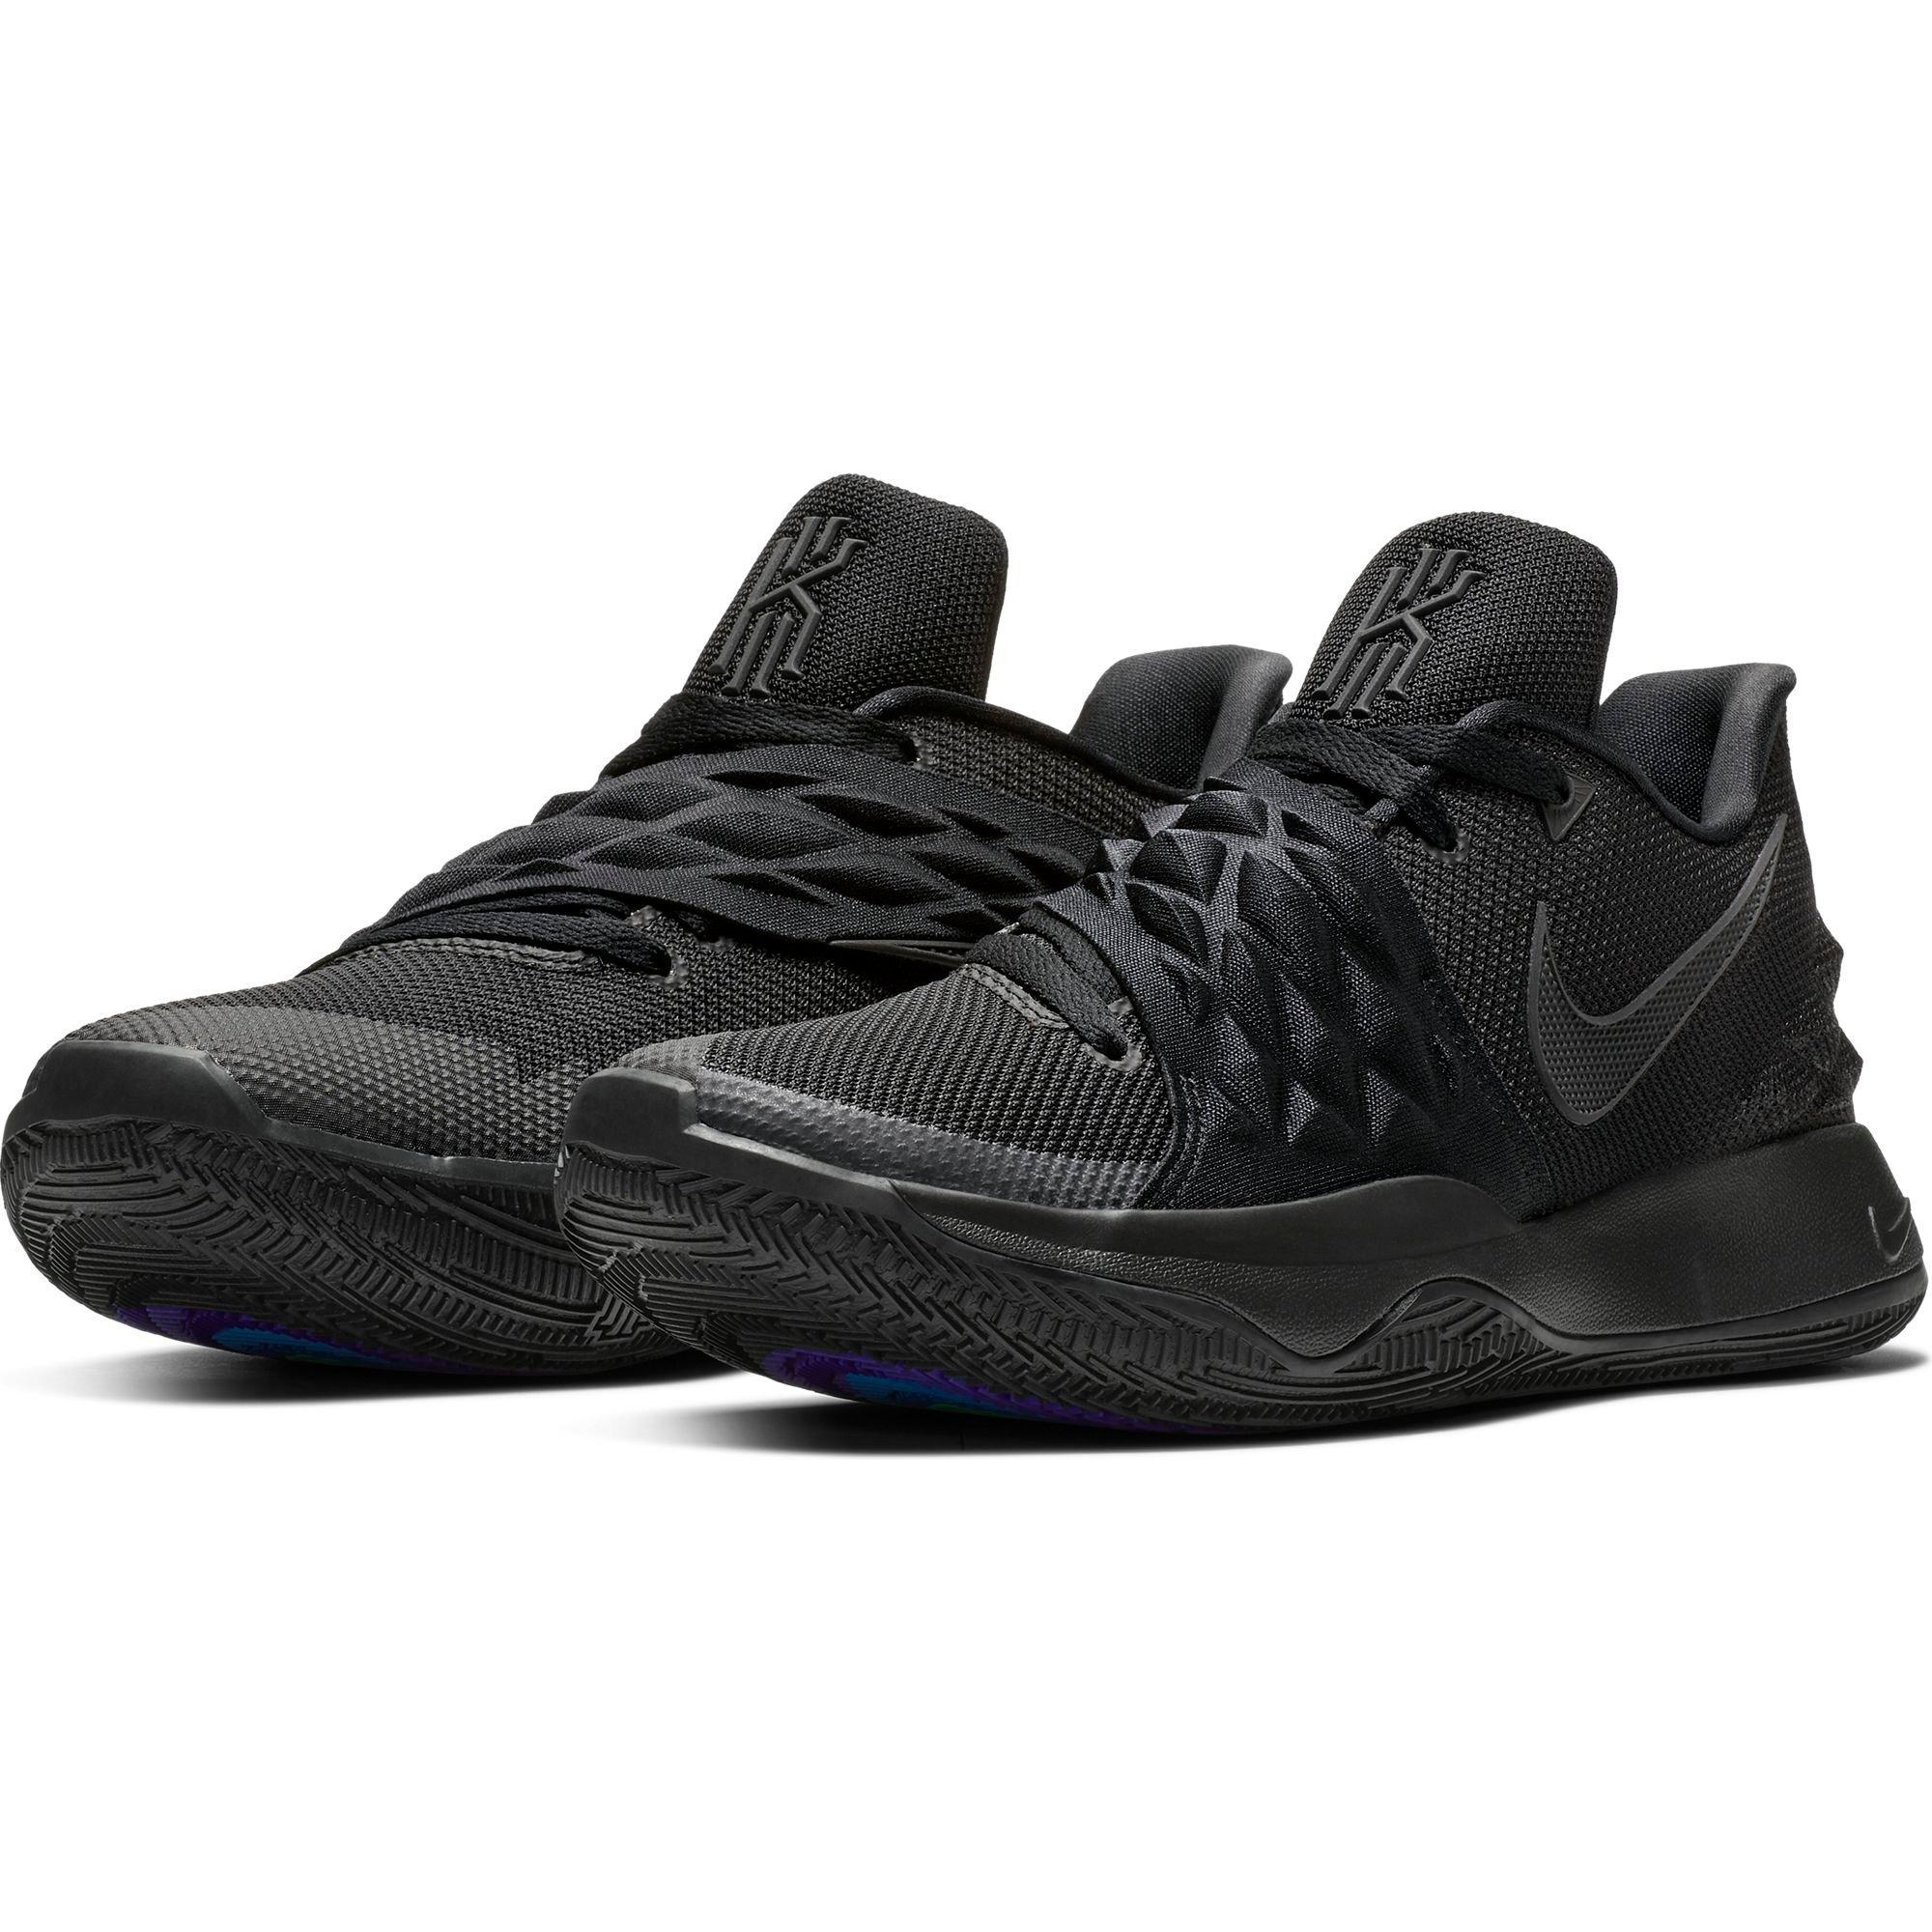 all black low top basketball shoes